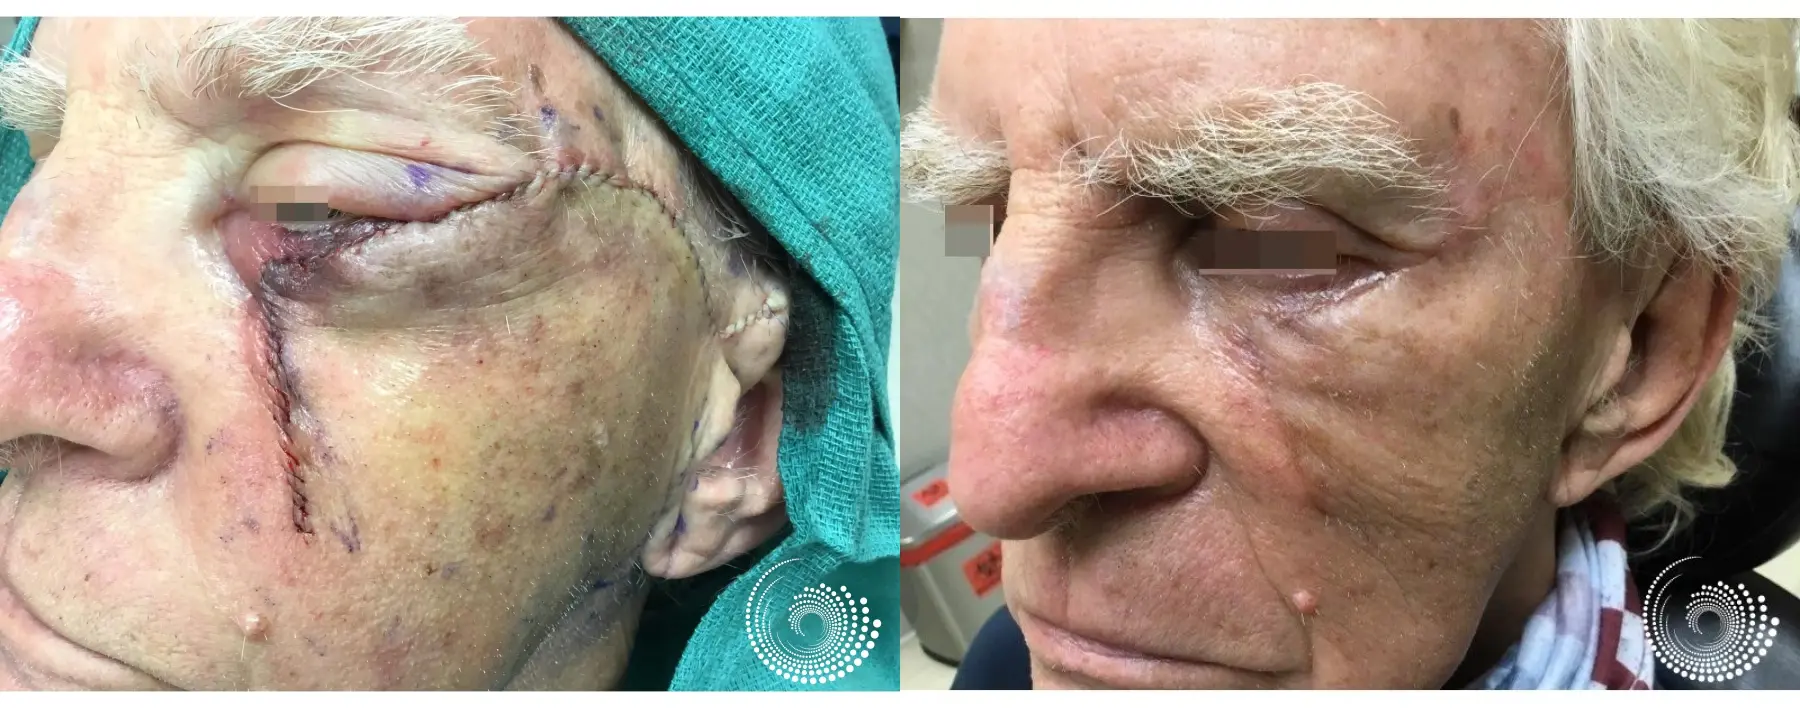 Basal Cell skin cancer under eye Mohs surgery - Before and After 3